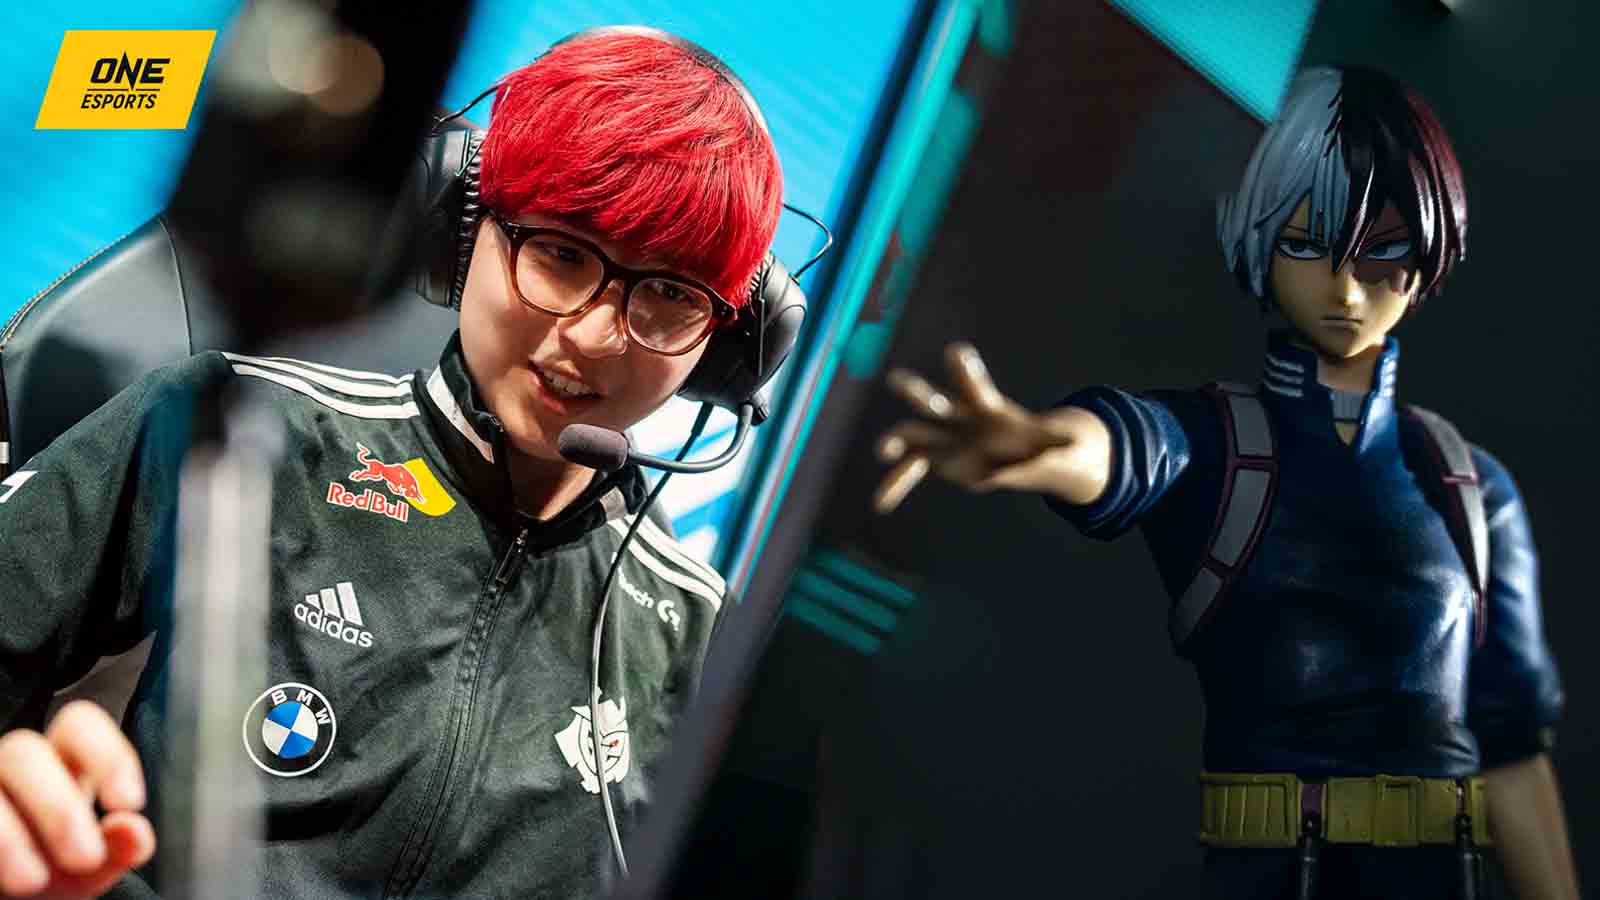 Exclusive: G2 Esports’ Hans Sama is living in an ascending anime arc, and loving every moment of it - ONE Esports